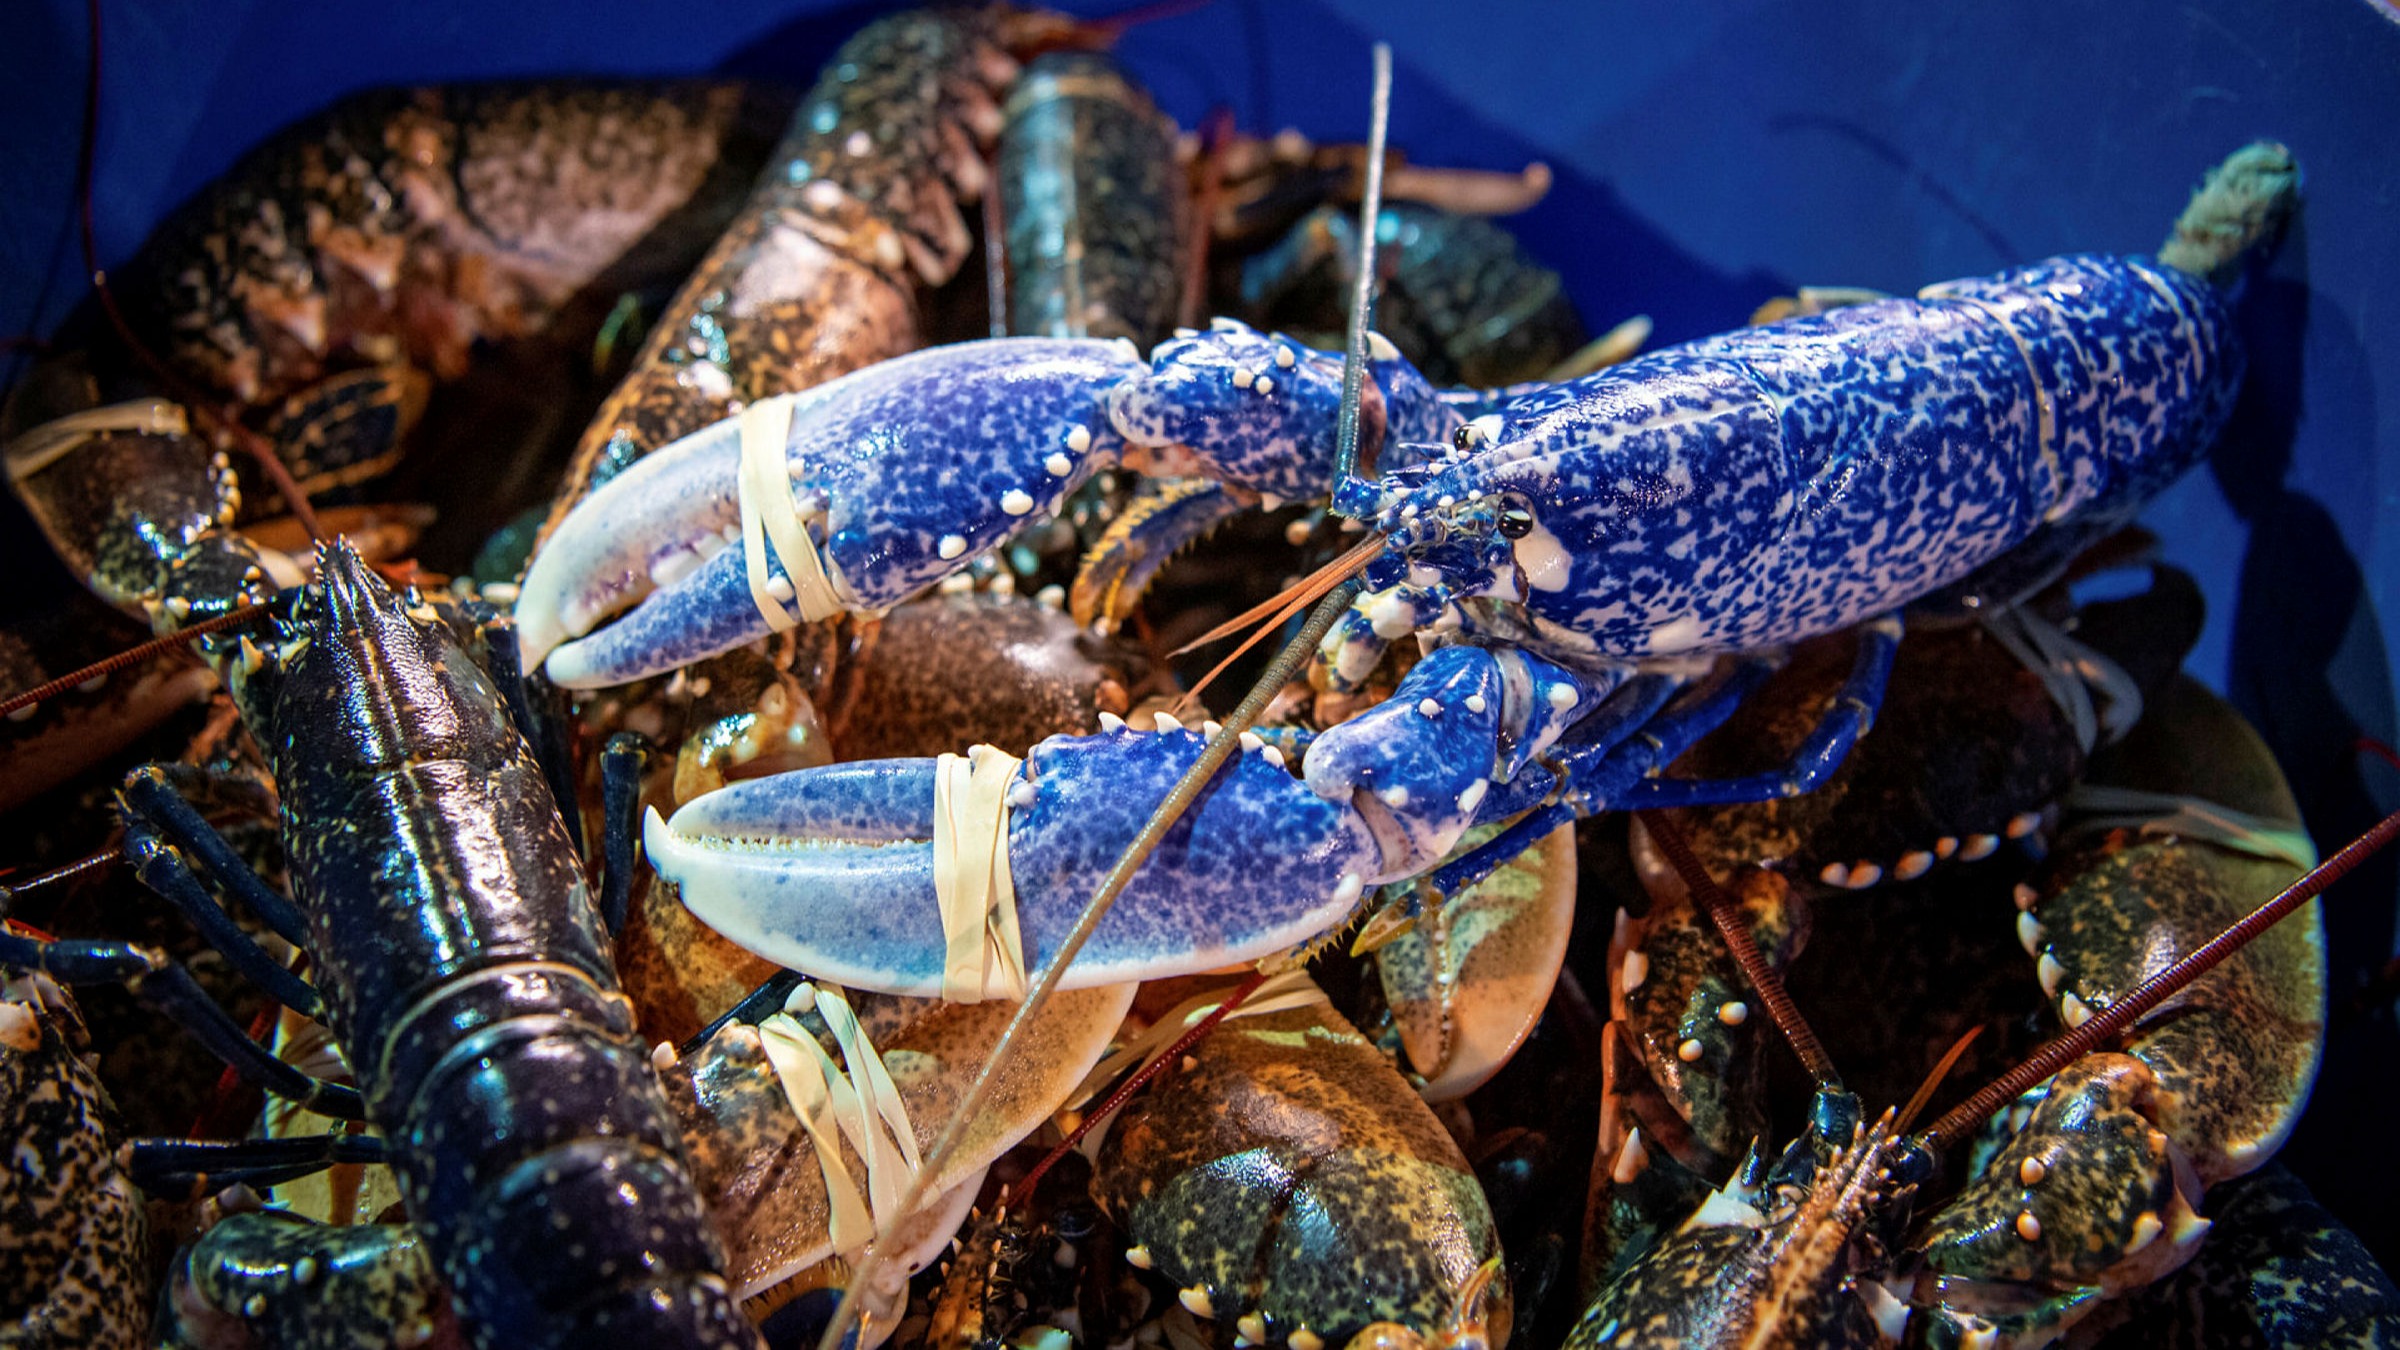 How to kill a lobster is as much about our moral code as science |  Financial Times